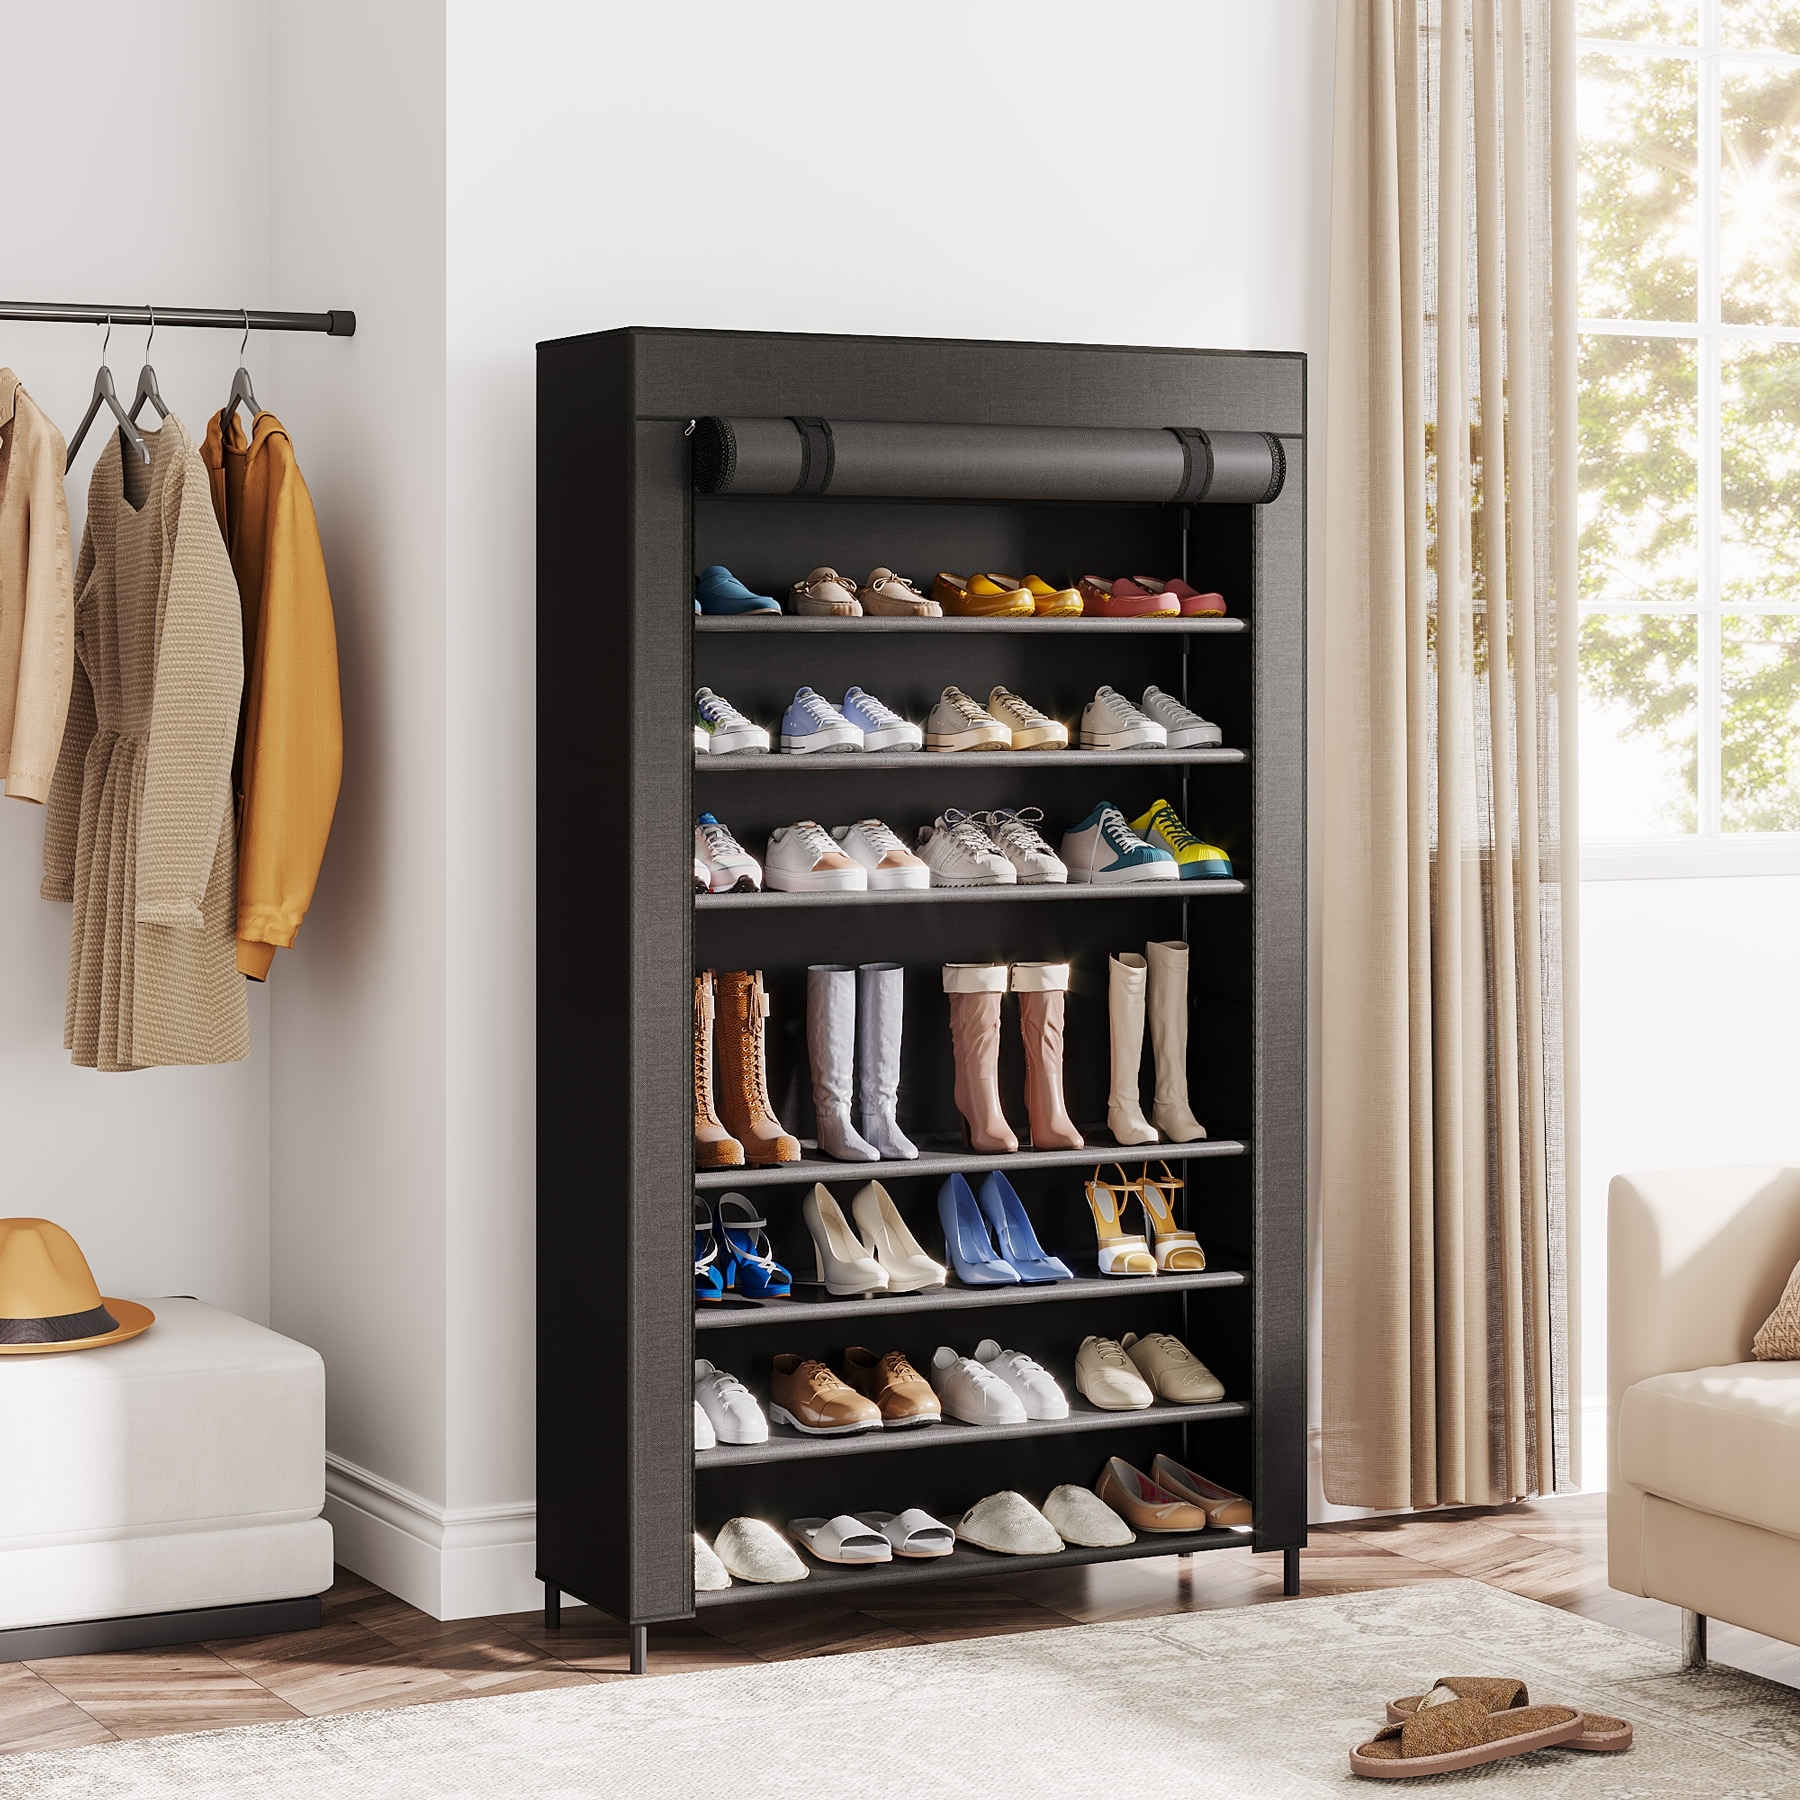 https://ak1.ostkcdn.com/images/products/is/images/direct/cbe0e1663dd8f343b8e4d1e9a61724bb06aacb6e/9-Tier-Tall-Shoe-Shelf-Stand-Rack-Organizer-with-Non-woven-Fabric-Cover.jpg